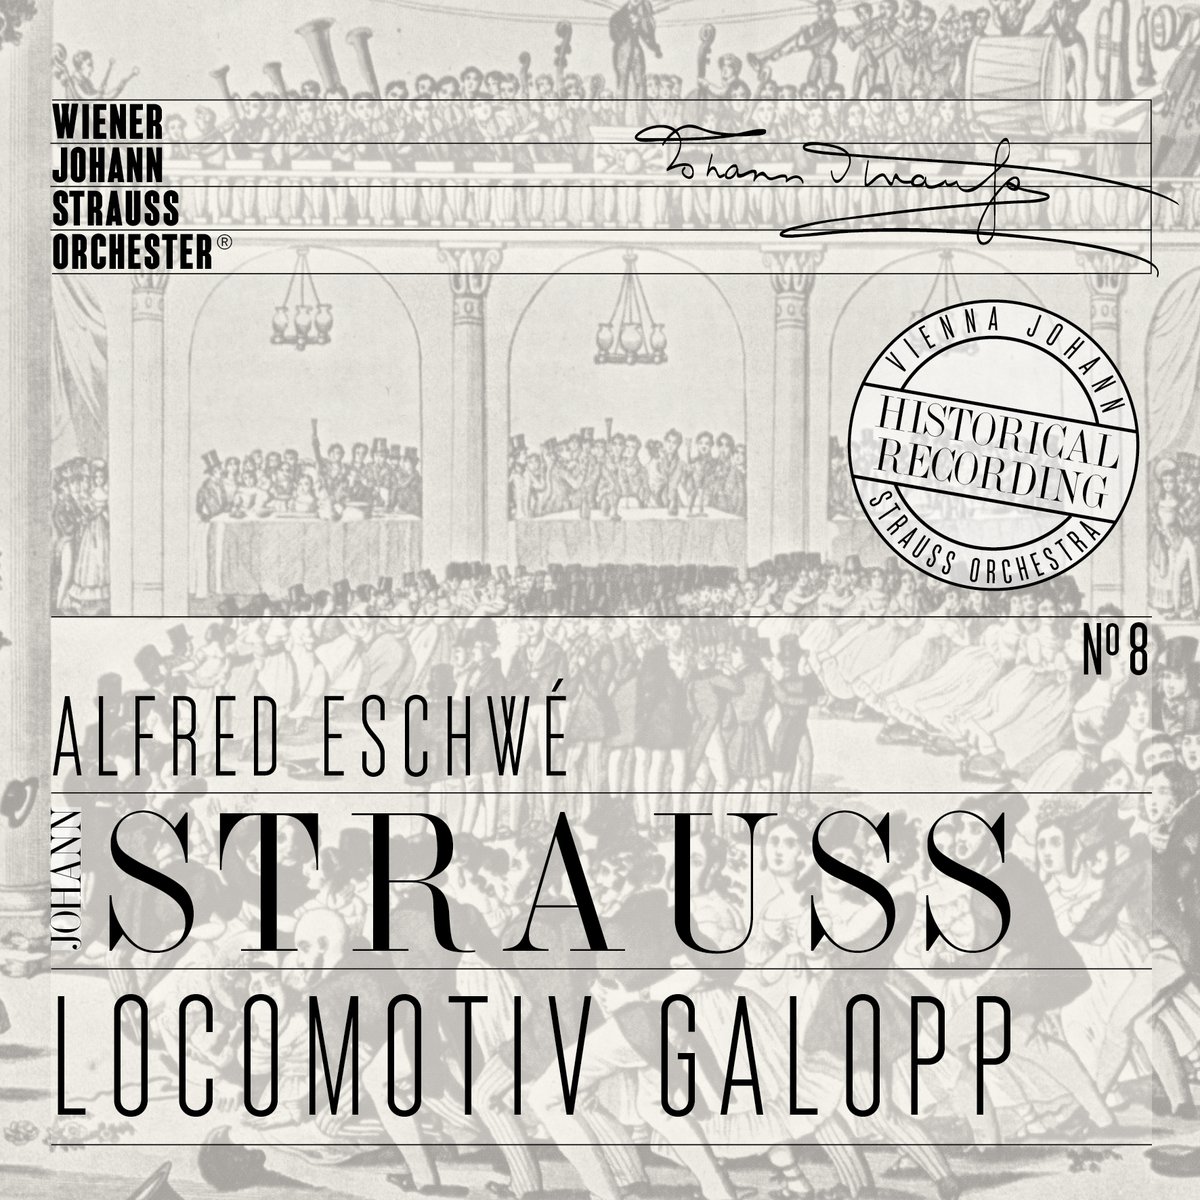 🎶 Strauss recording of the day 🎶
WJSO-008 | 5 – Philipp Fahrbach sen.: Danish Clog Polka op. 255 
▶️ Spotify:ow.ly/kAC450NoolX
▶️ Apple Music:ow.ly/UbPH50NoolU
▶️ Youtube:ow.ly/WXLK50NoolS
▶️ Tidal:ow.ly/ybVc50NoolW

📀 Info&Shop: ow.ly/51qG50NoolV